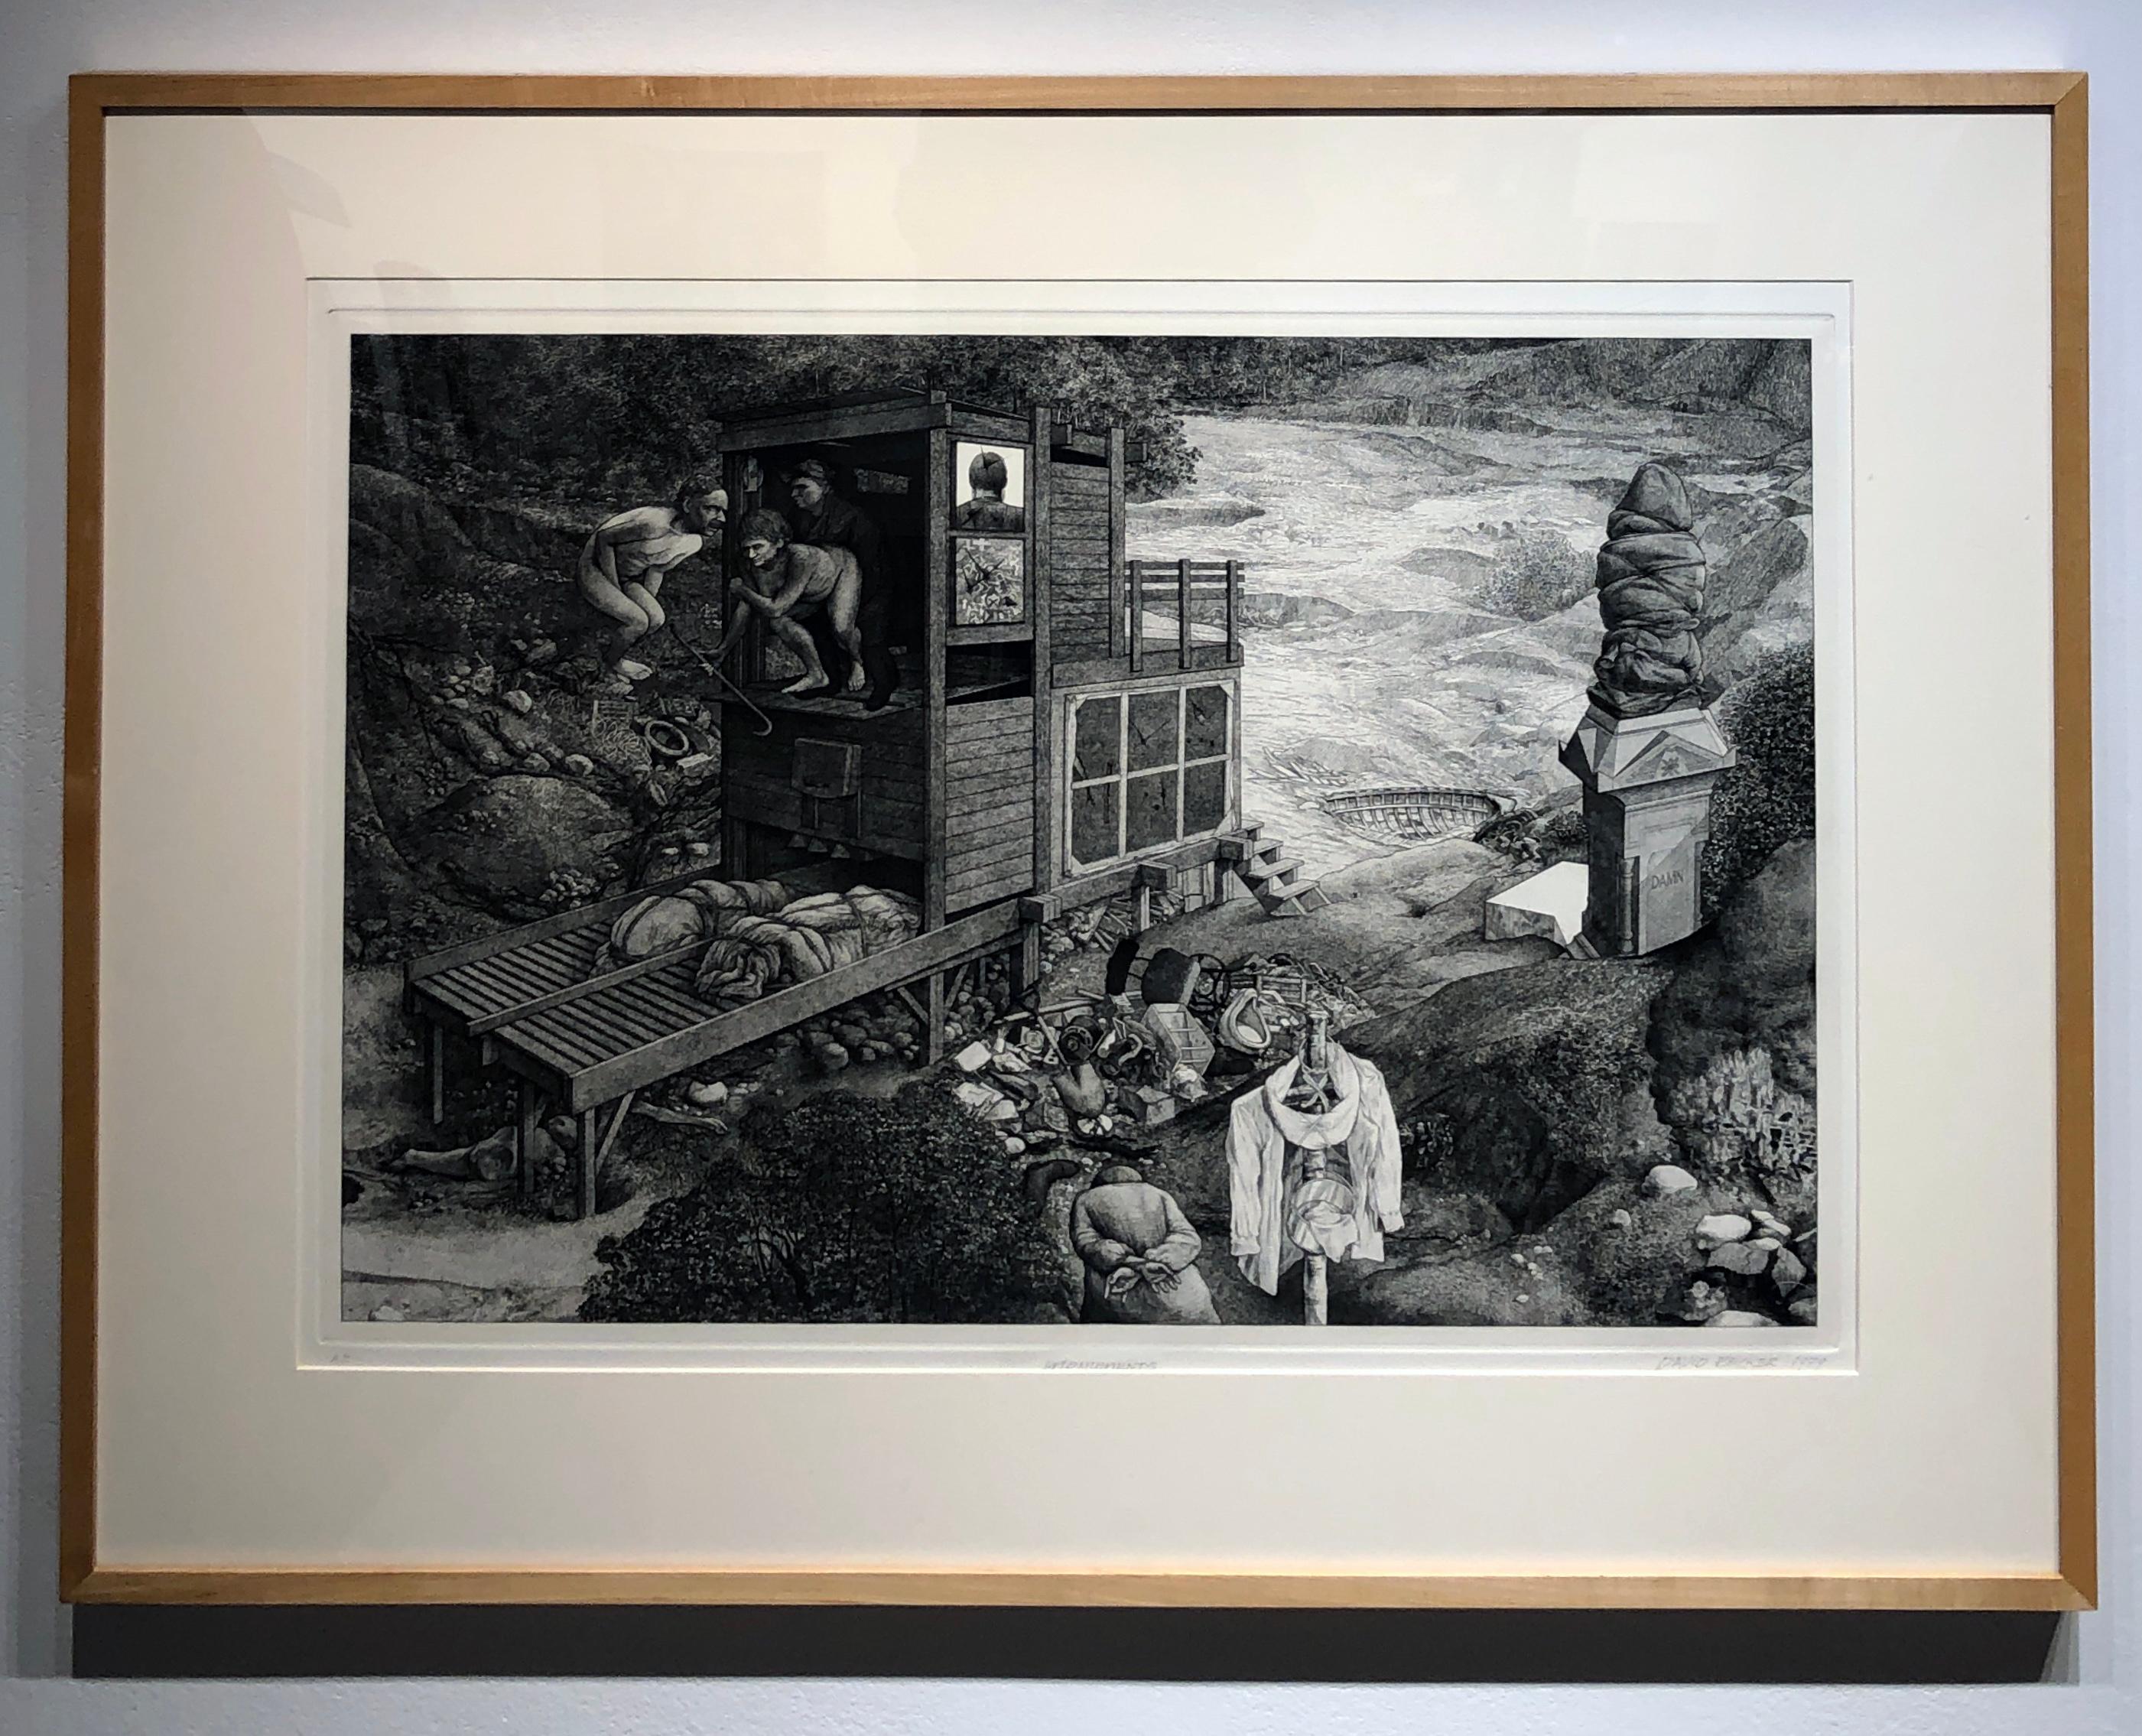 Monuments - Highly Detailed Allegorical, Surreal Etching with Multiple Figures - Print by David Becker